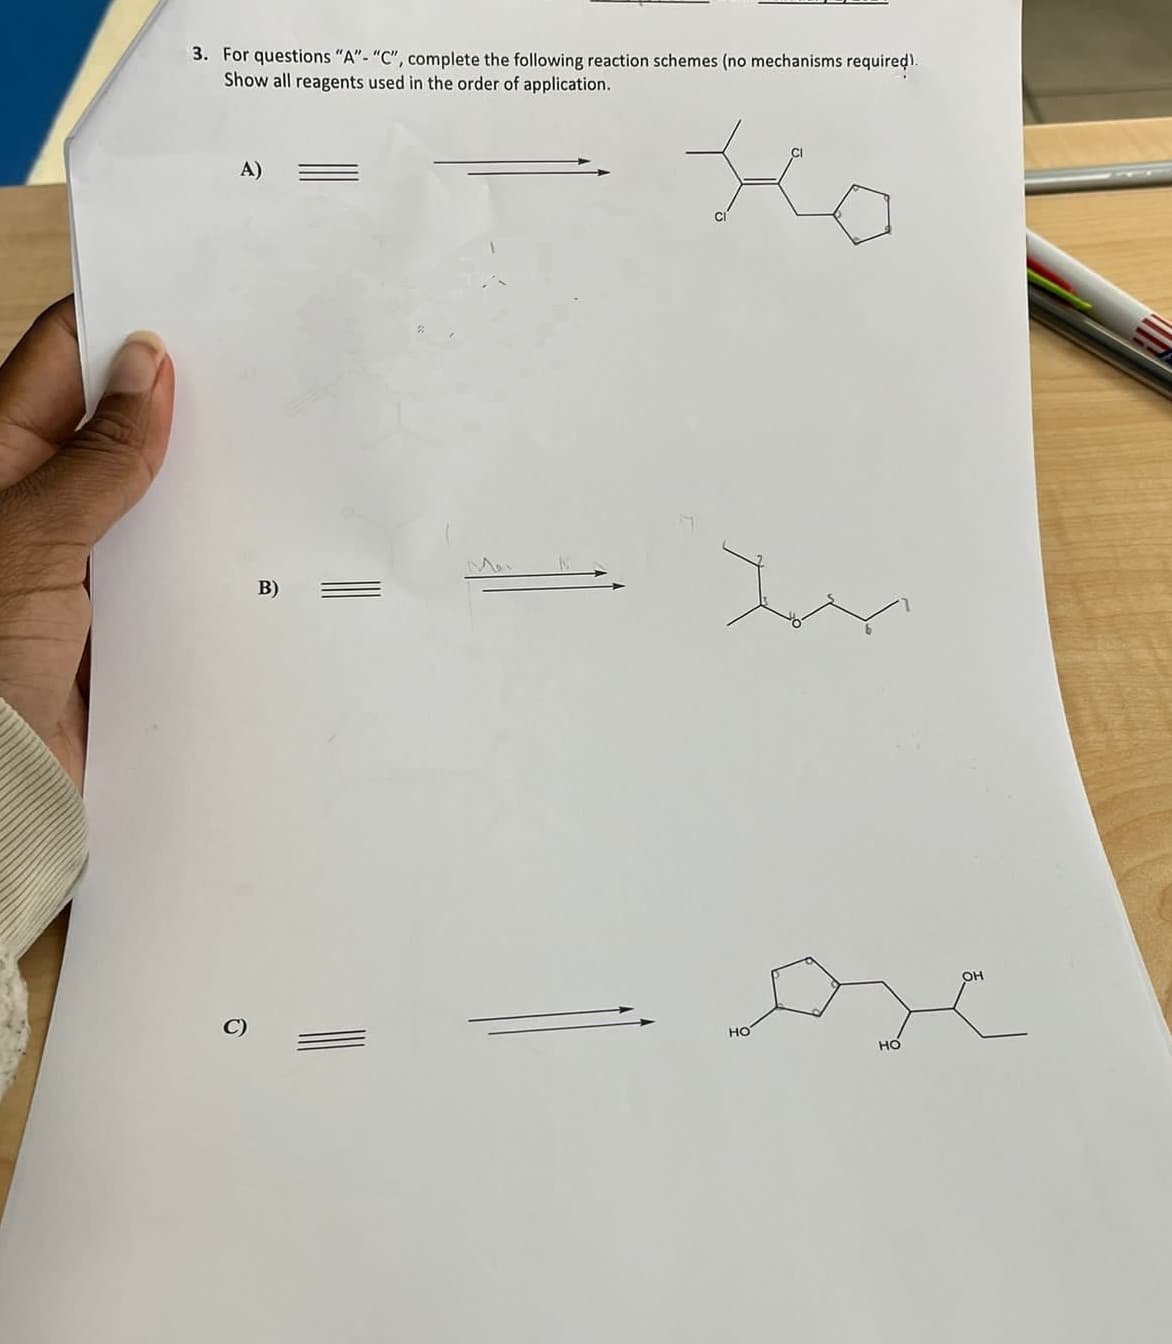 3. For questions "A"- "C", complete the following reaction schemes (no mechanisms required).
Show all reagents used in the order of application.
th
A)
6
B)
|||
Ins
HO
HO